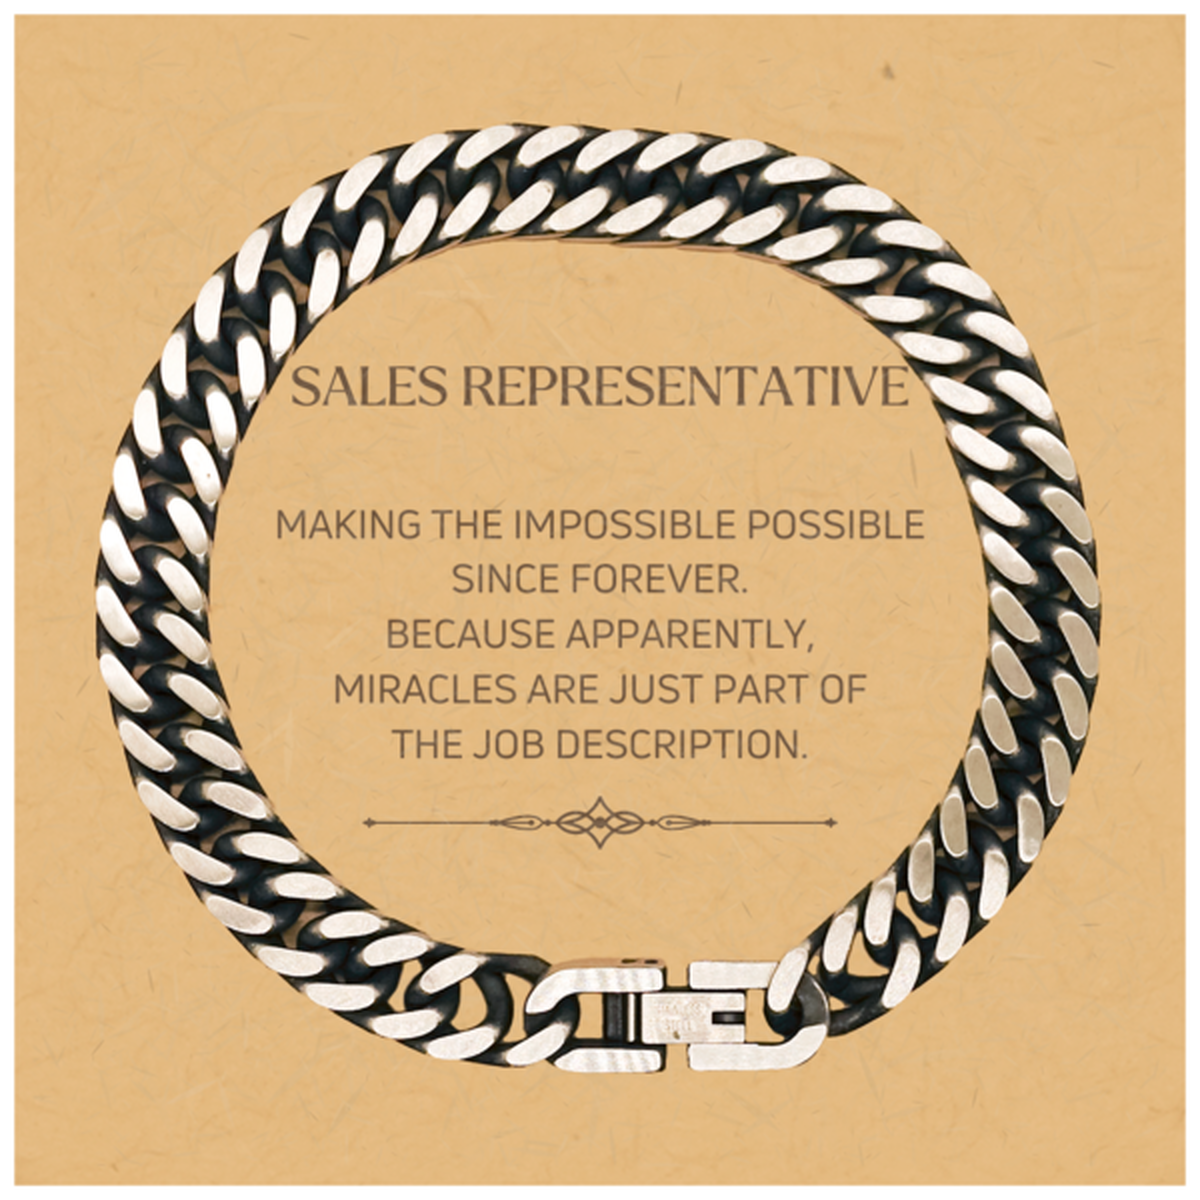 Funny Sales Representative Gifts, Miracles are just part of the job description, Inspirational Birthday Christmas Cuban Link Chain Bracelet For Sales Representative, Men, Women, Coworkers, Friends, Boss